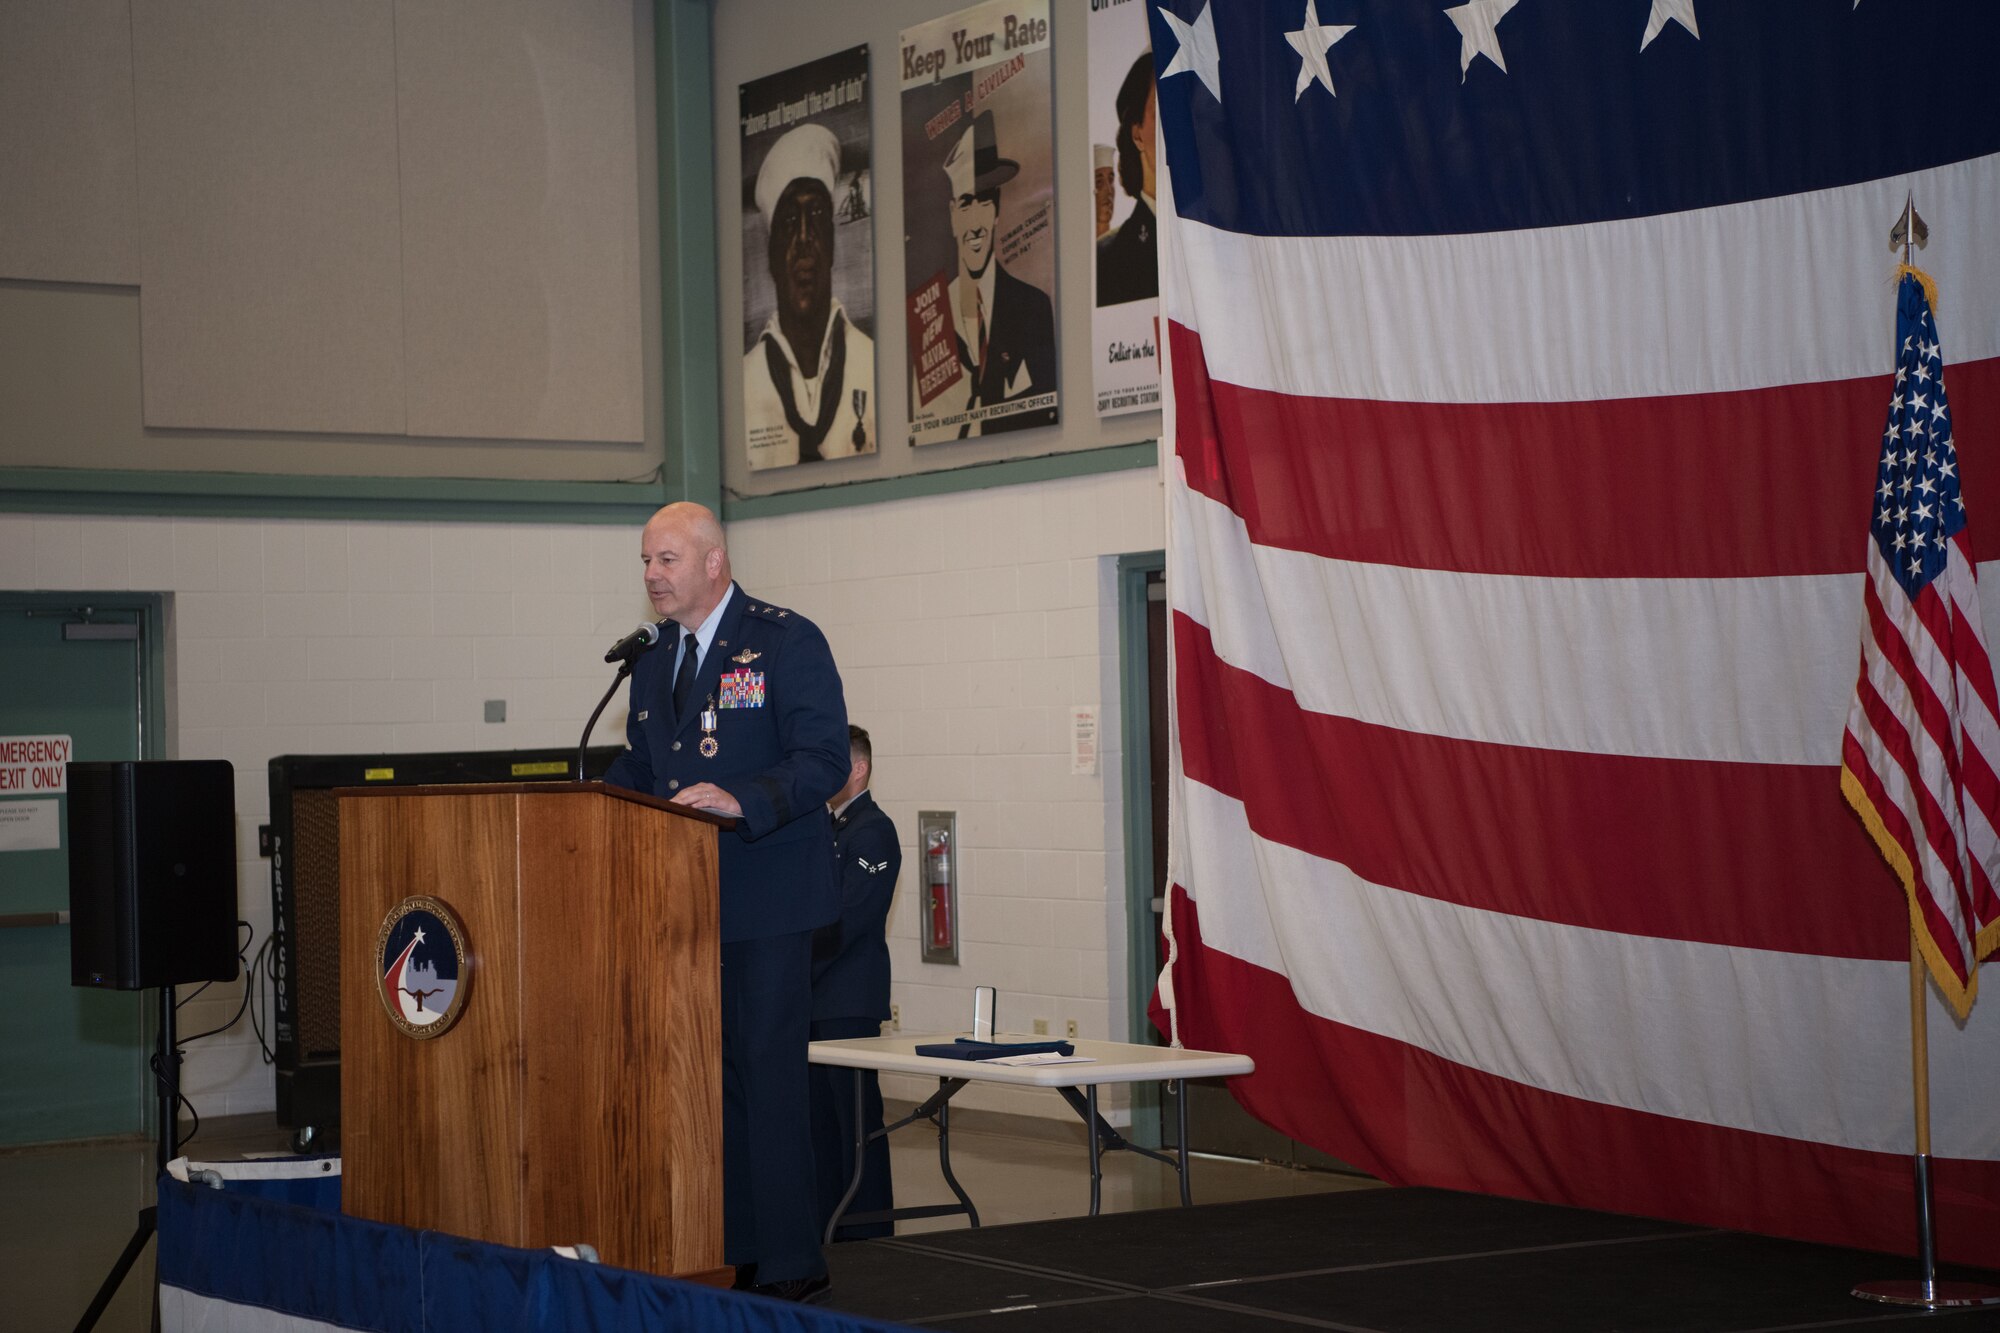 Maj Gen Brian Borgen addresses the audience for the final time as the Commander, Tenth Air Force.